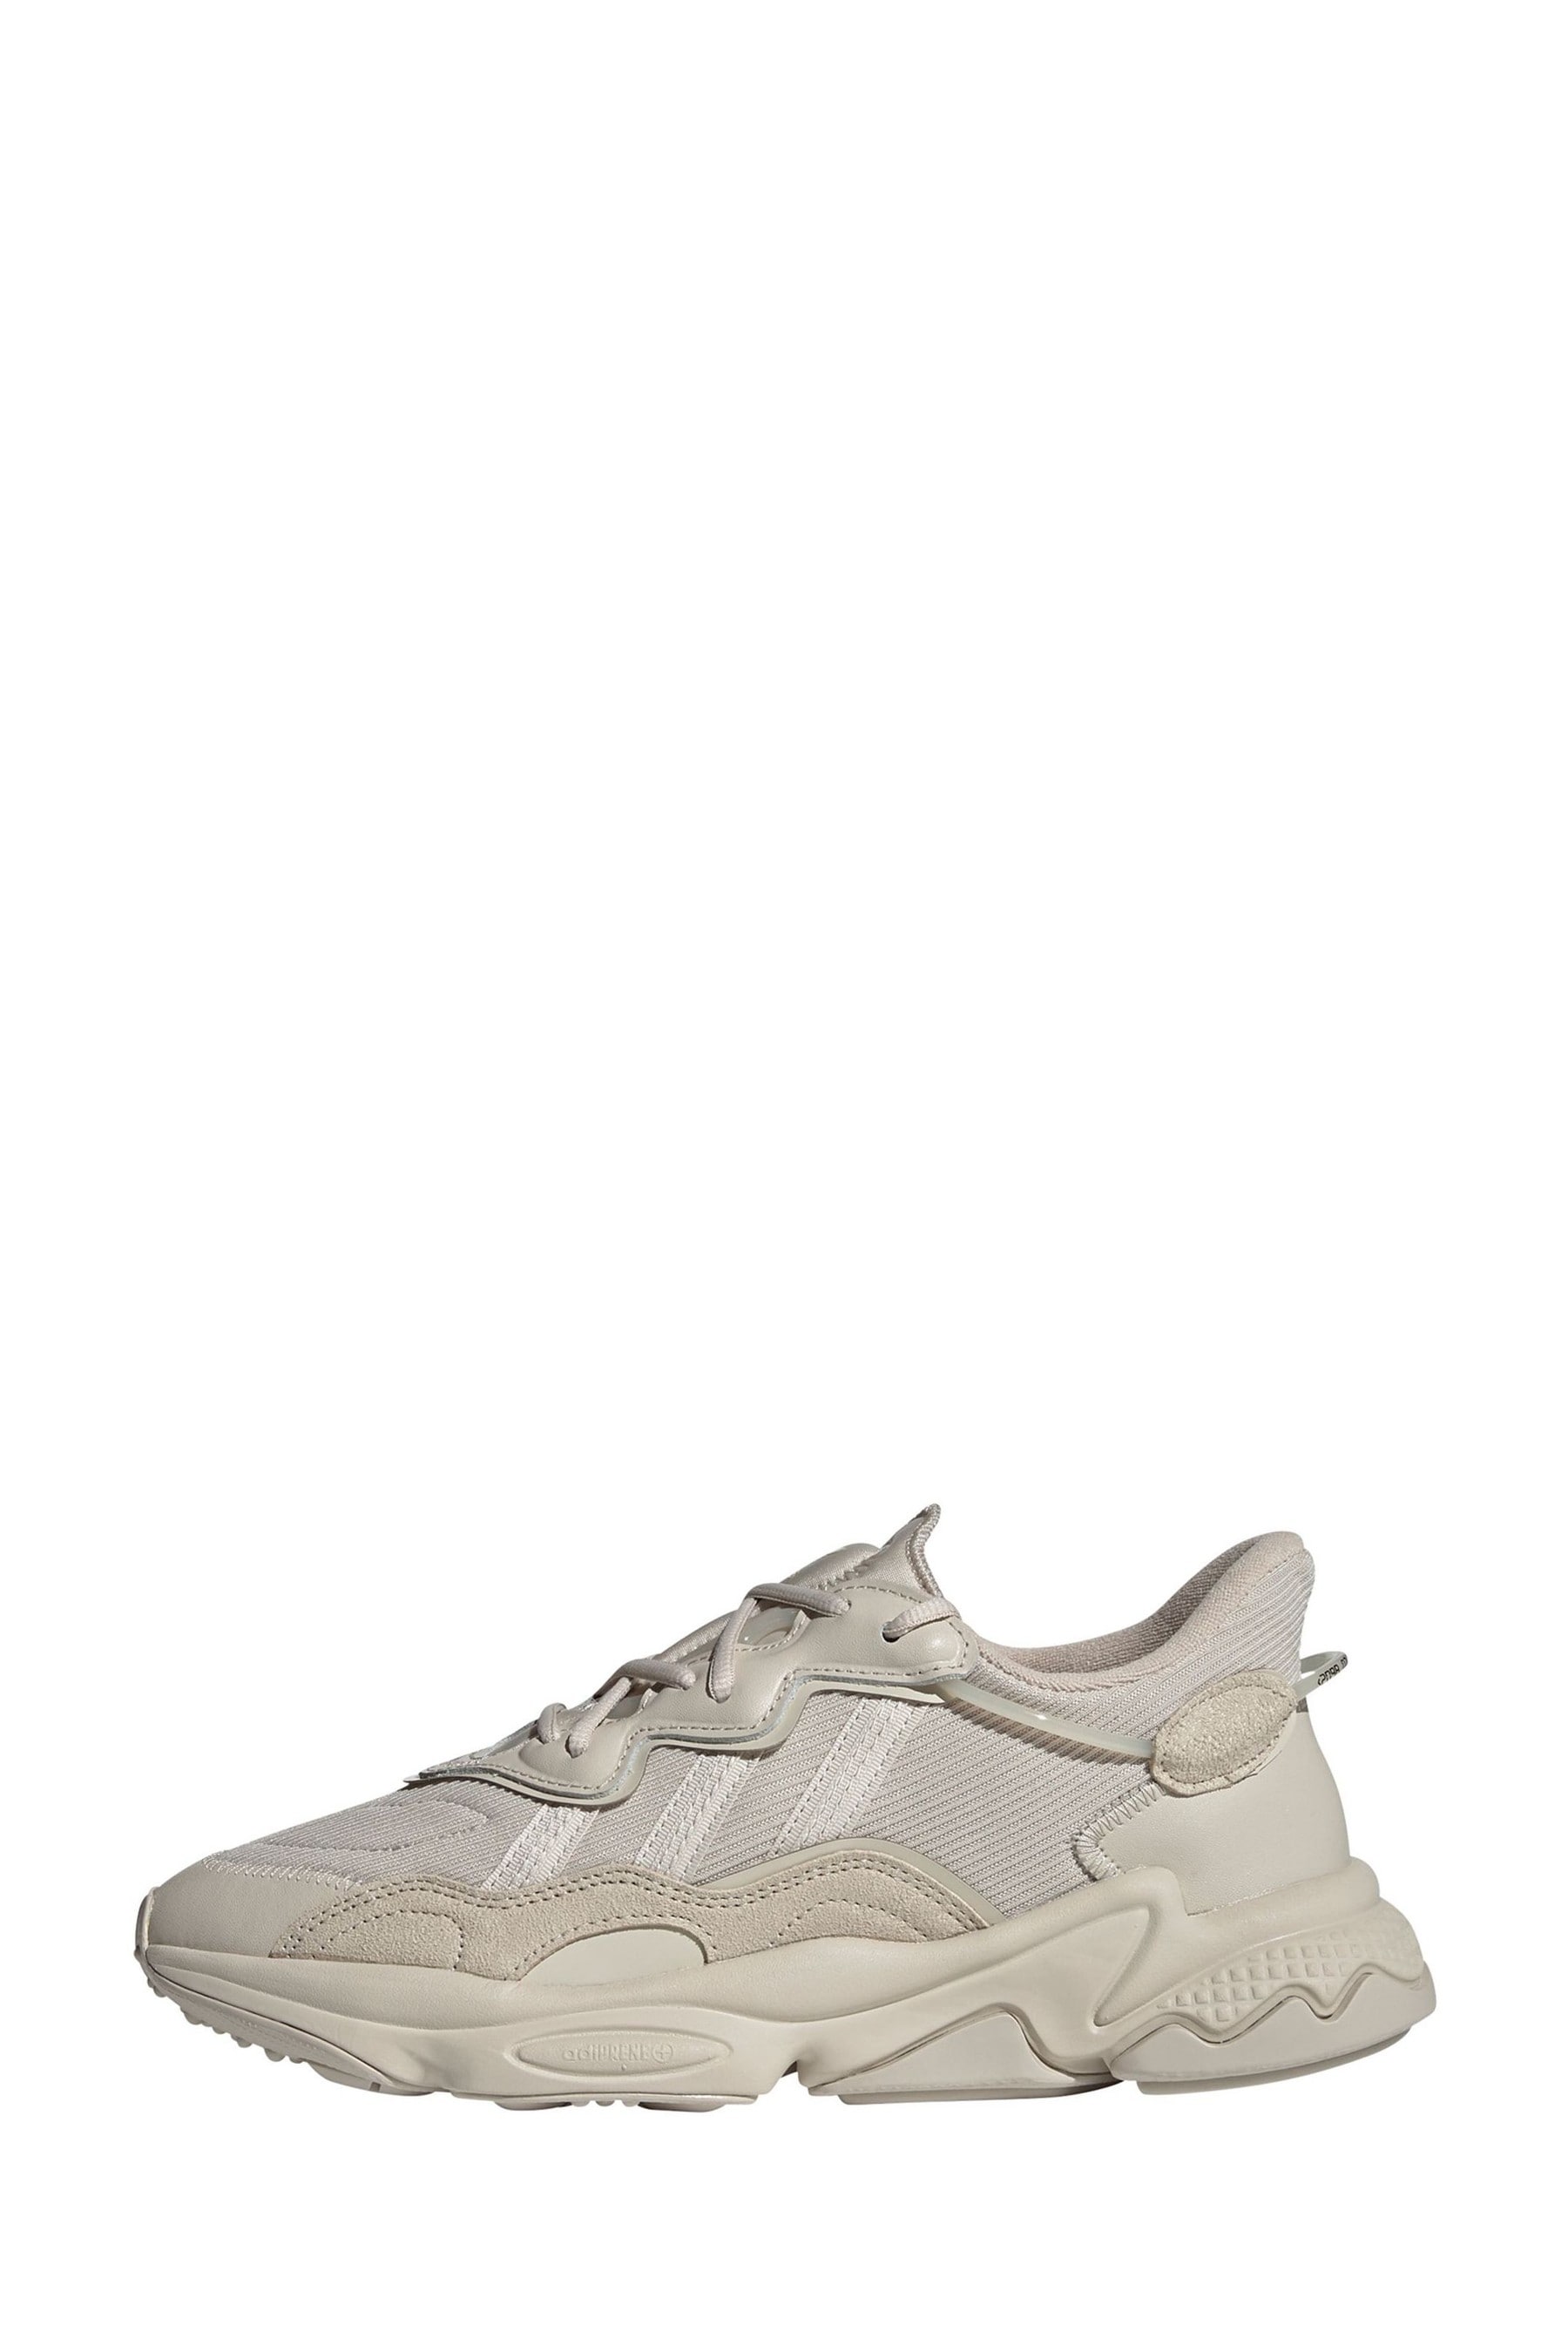 Buy adidas Originals Ozweego Trainers from the Next UK online shop